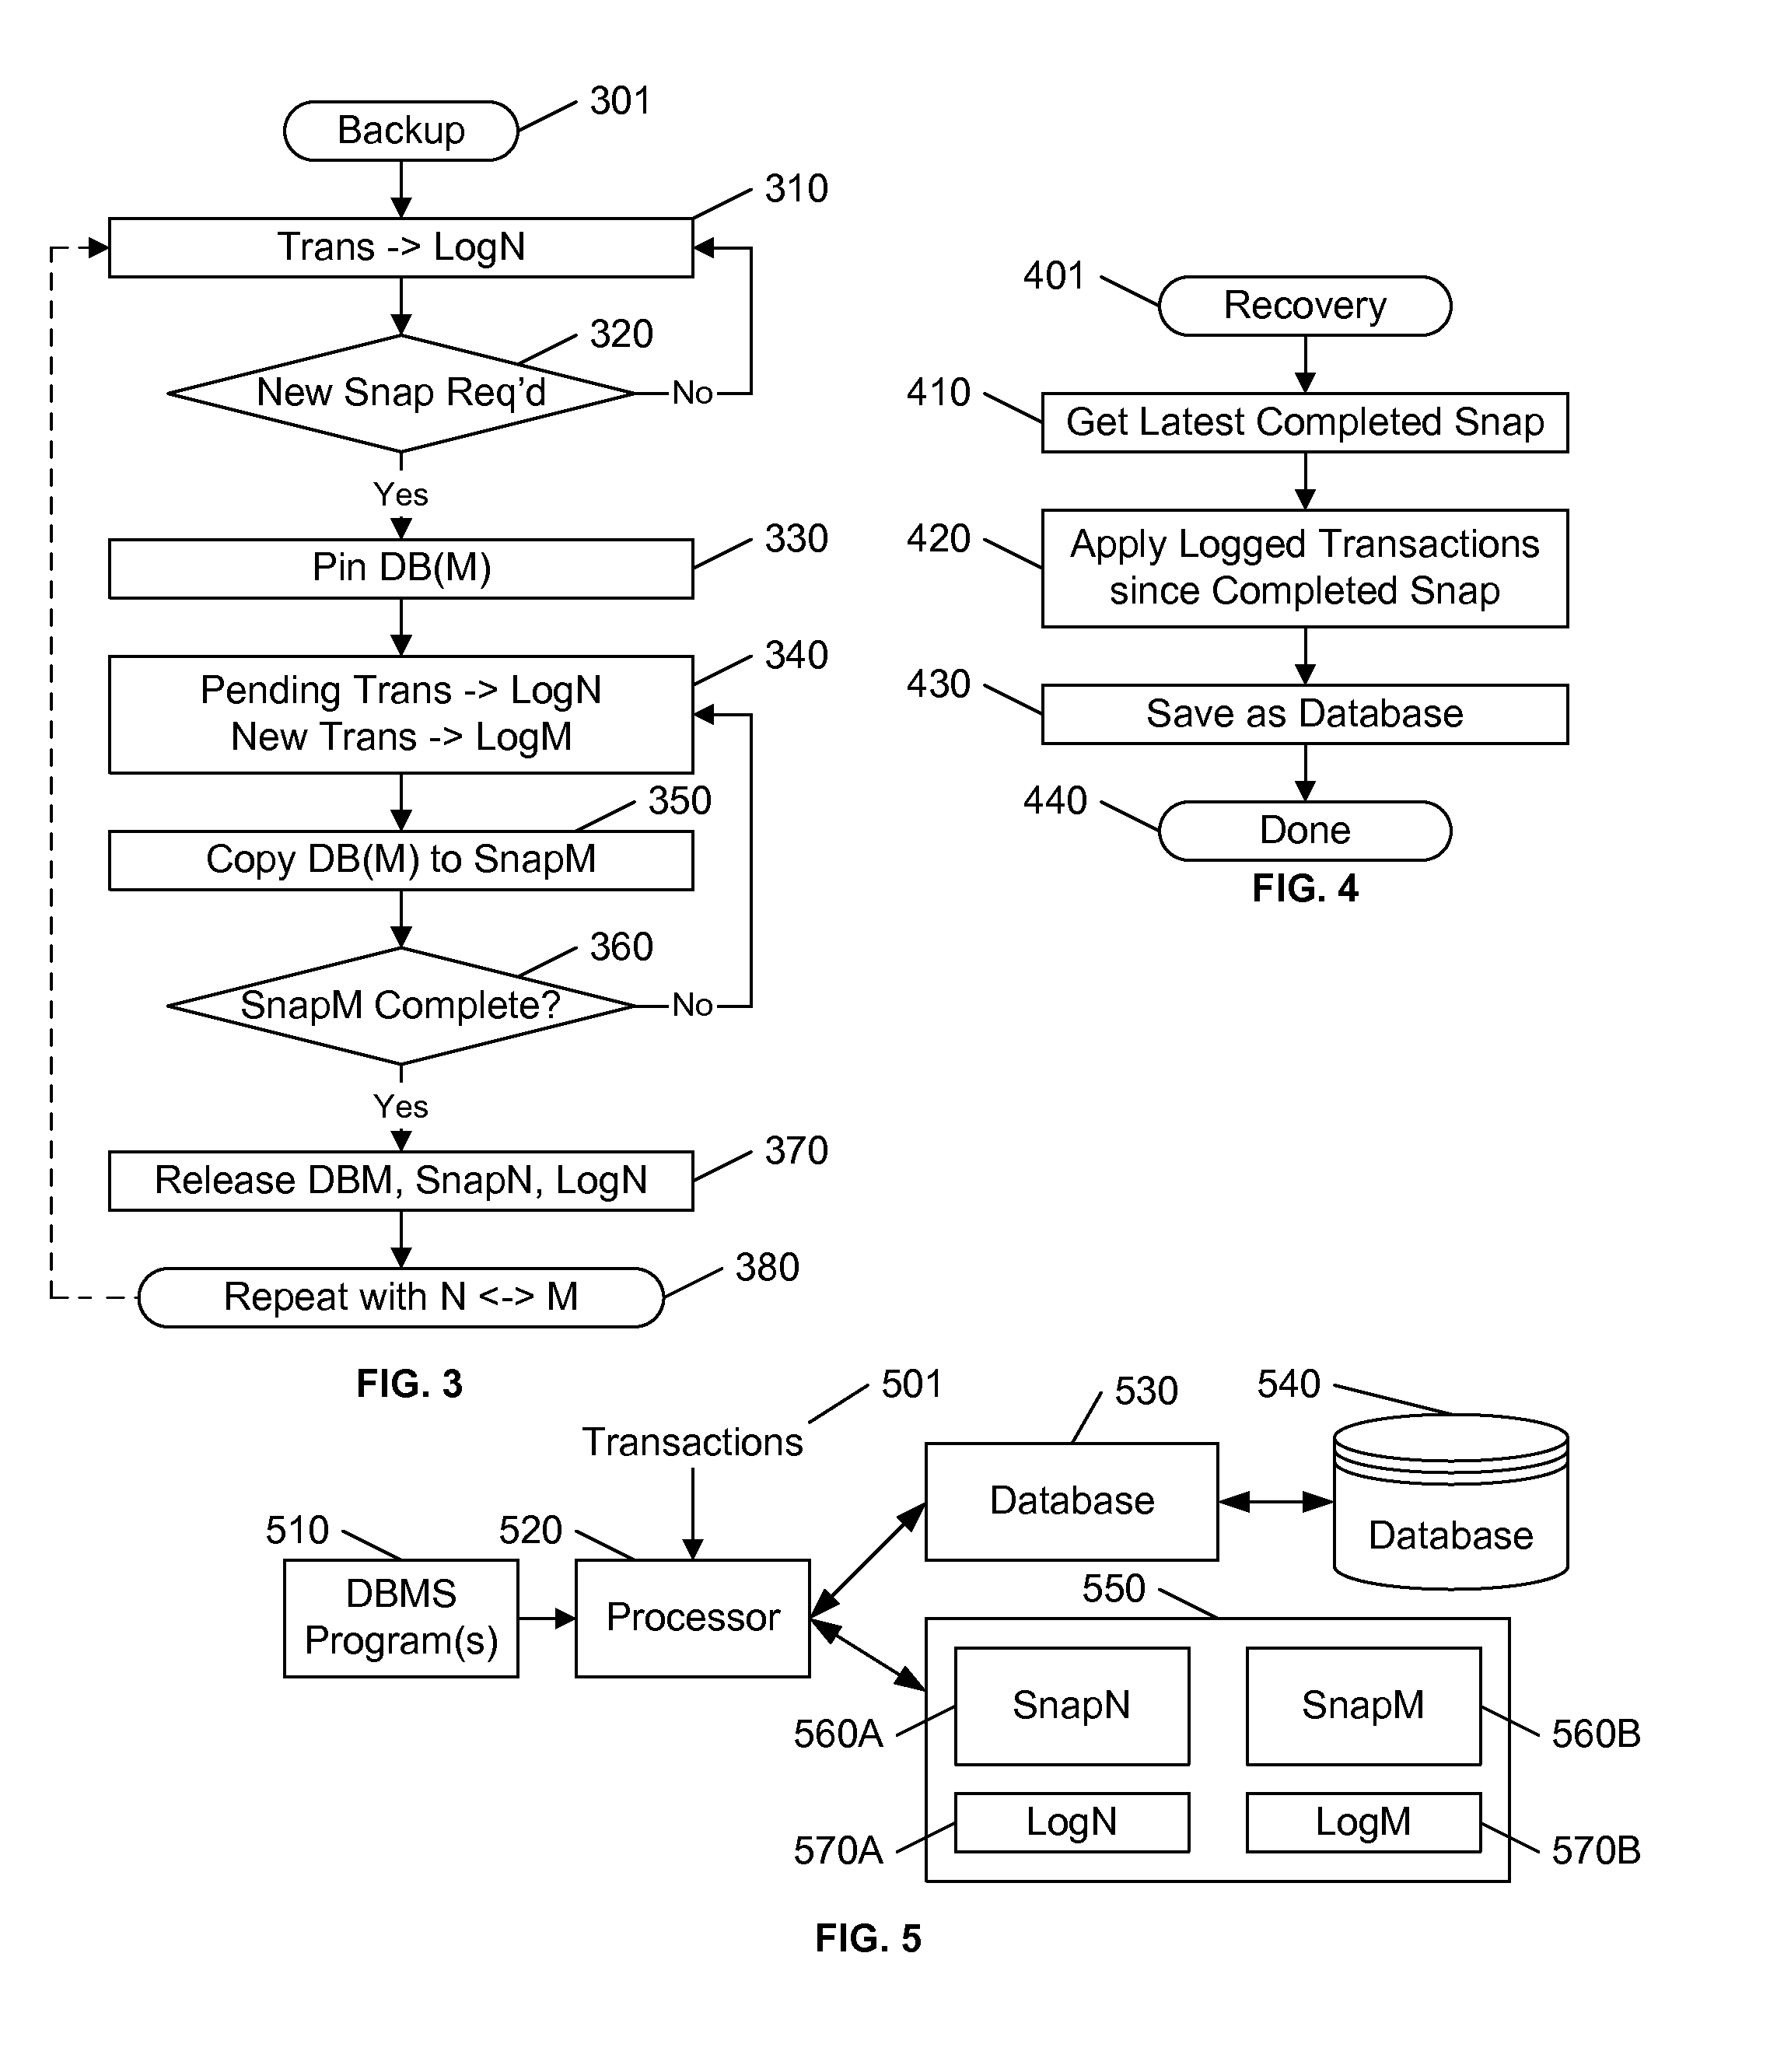 Durability implementation plan in an in-memory database system